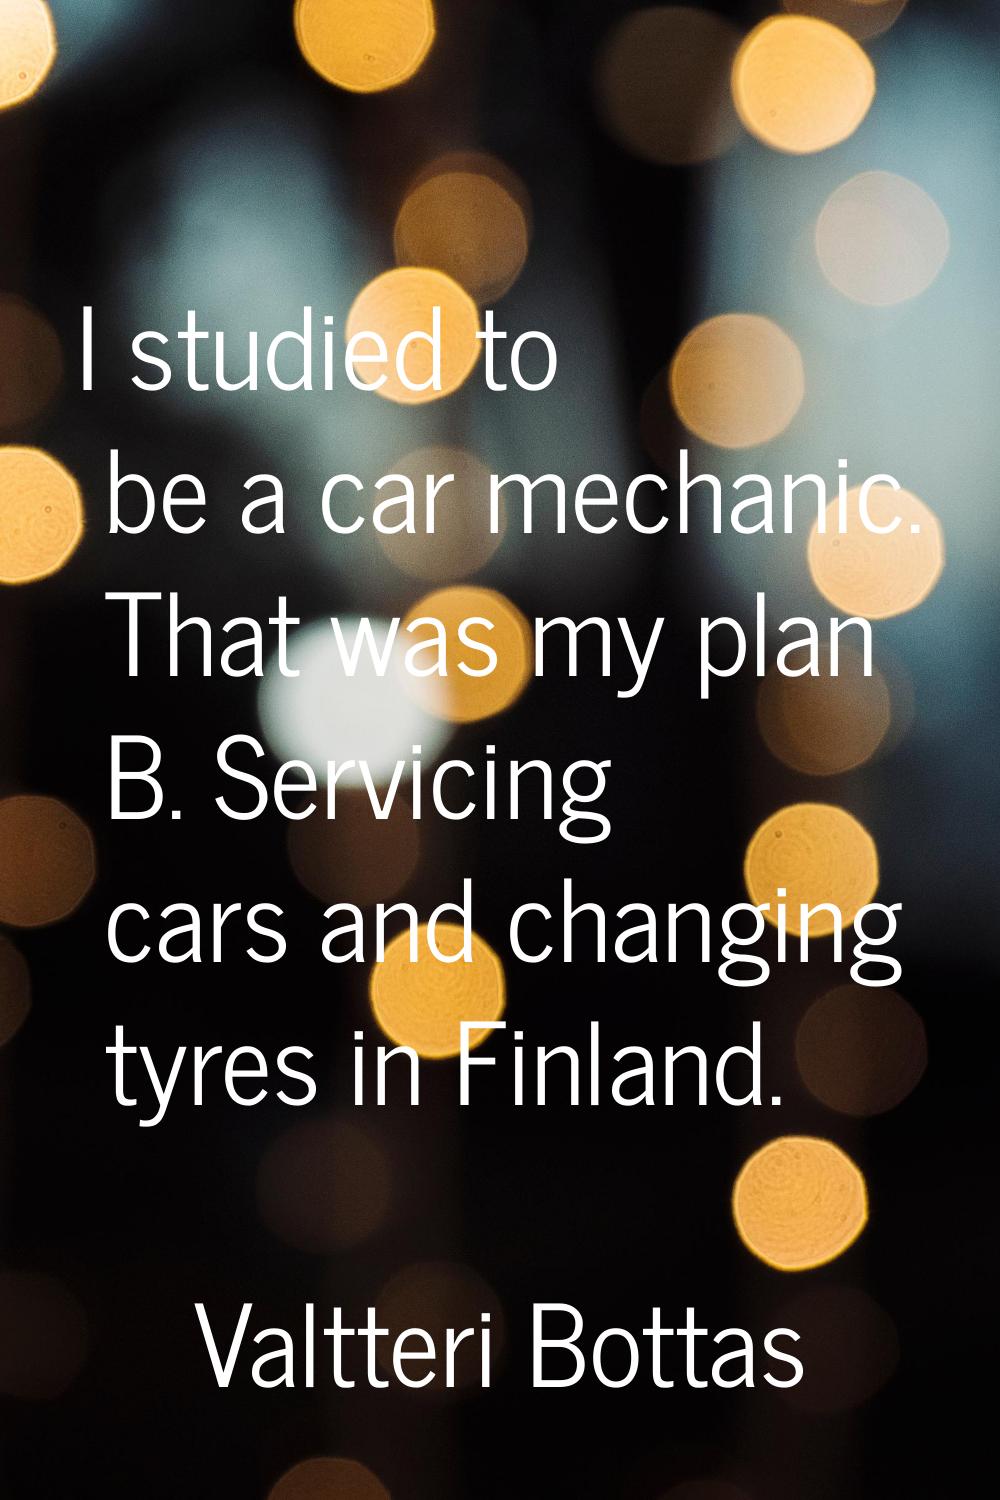 I studied to be a car mechanic. That was my plan B. Servicing cars and changing tyres in Finland.